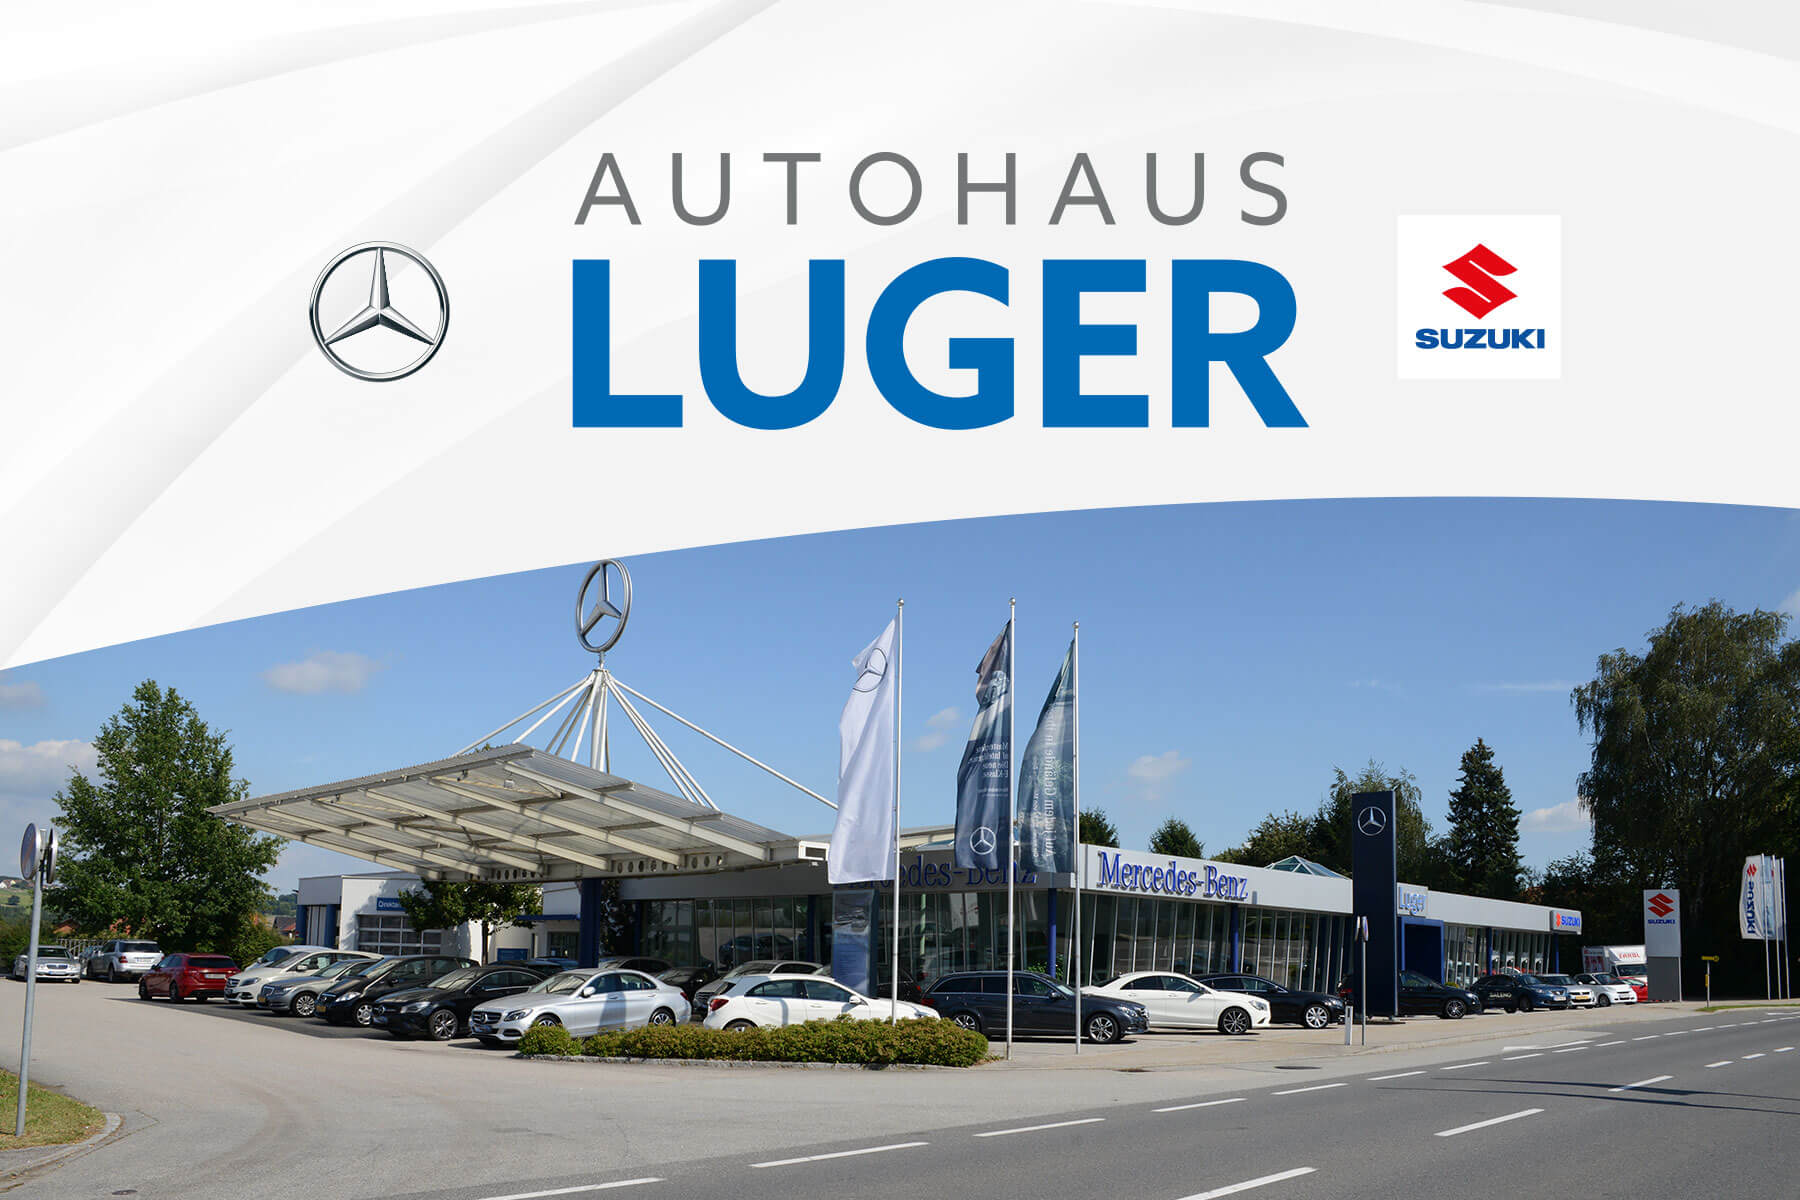 (c) Autohaus-luger.at